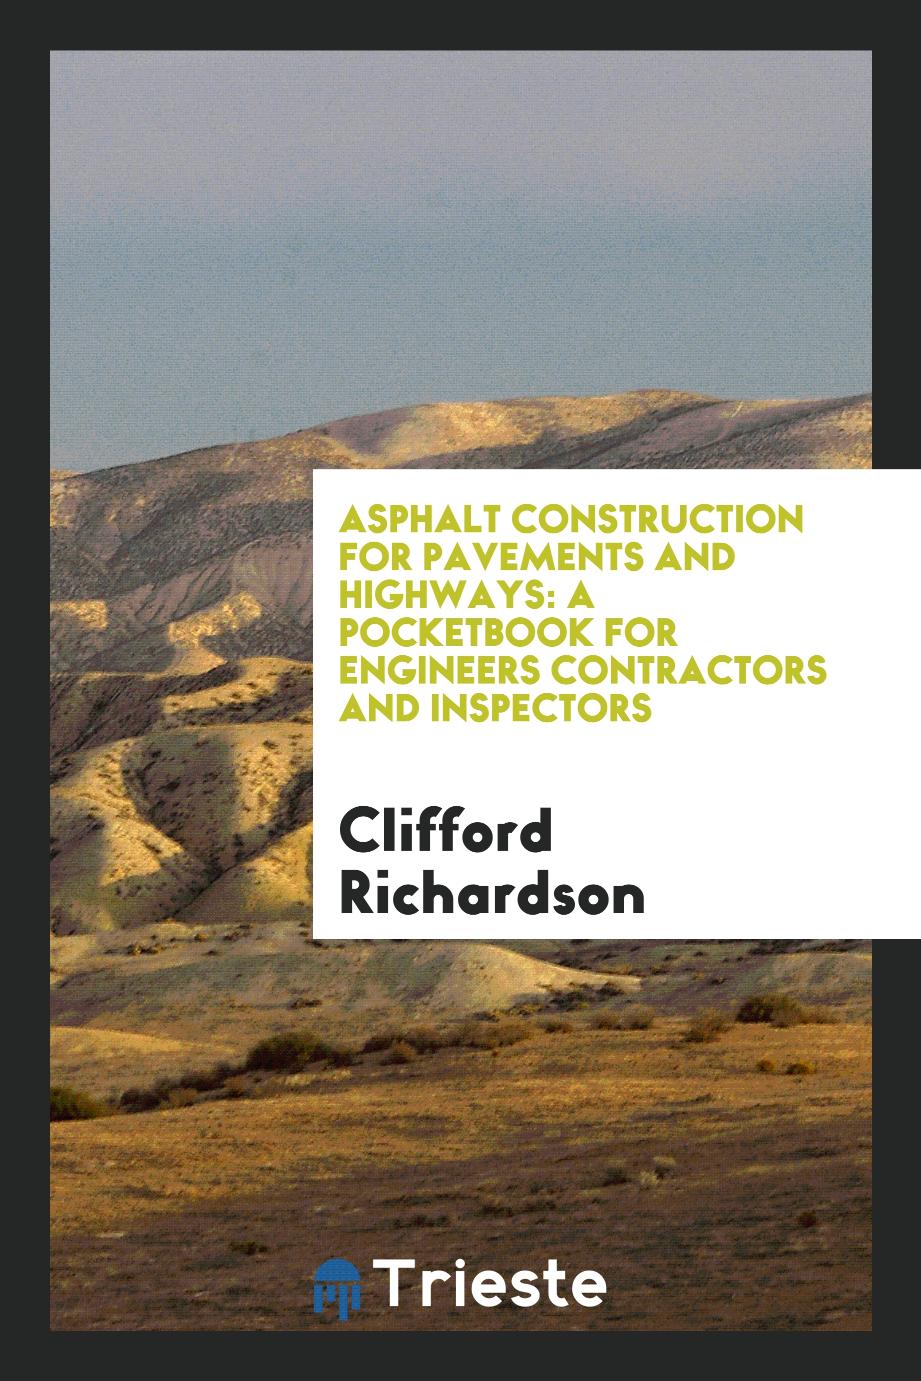 Asphalt Construction for Pavements and Highways: A Pocketbook for Engineers Contractors and Inspectors